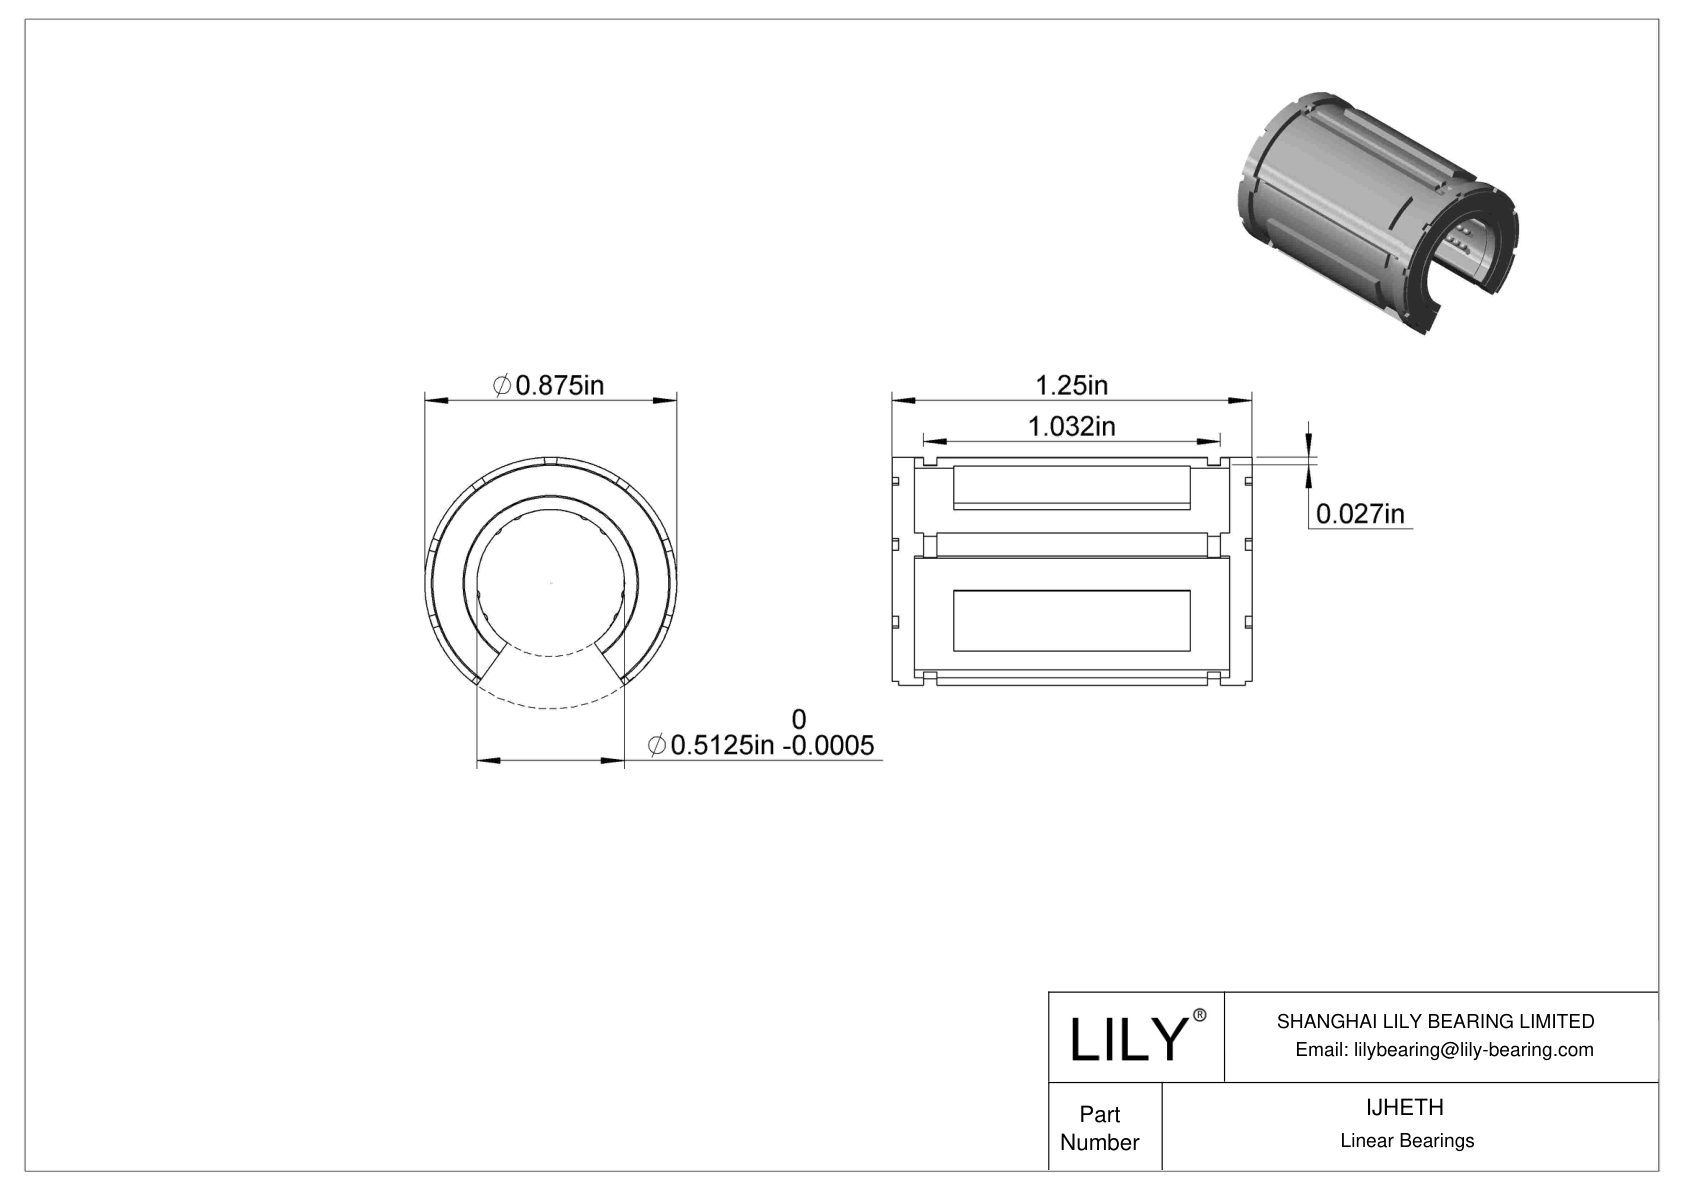 IJHETH Common Linear Ball Bearings for Support Rail Shafts cad drawing